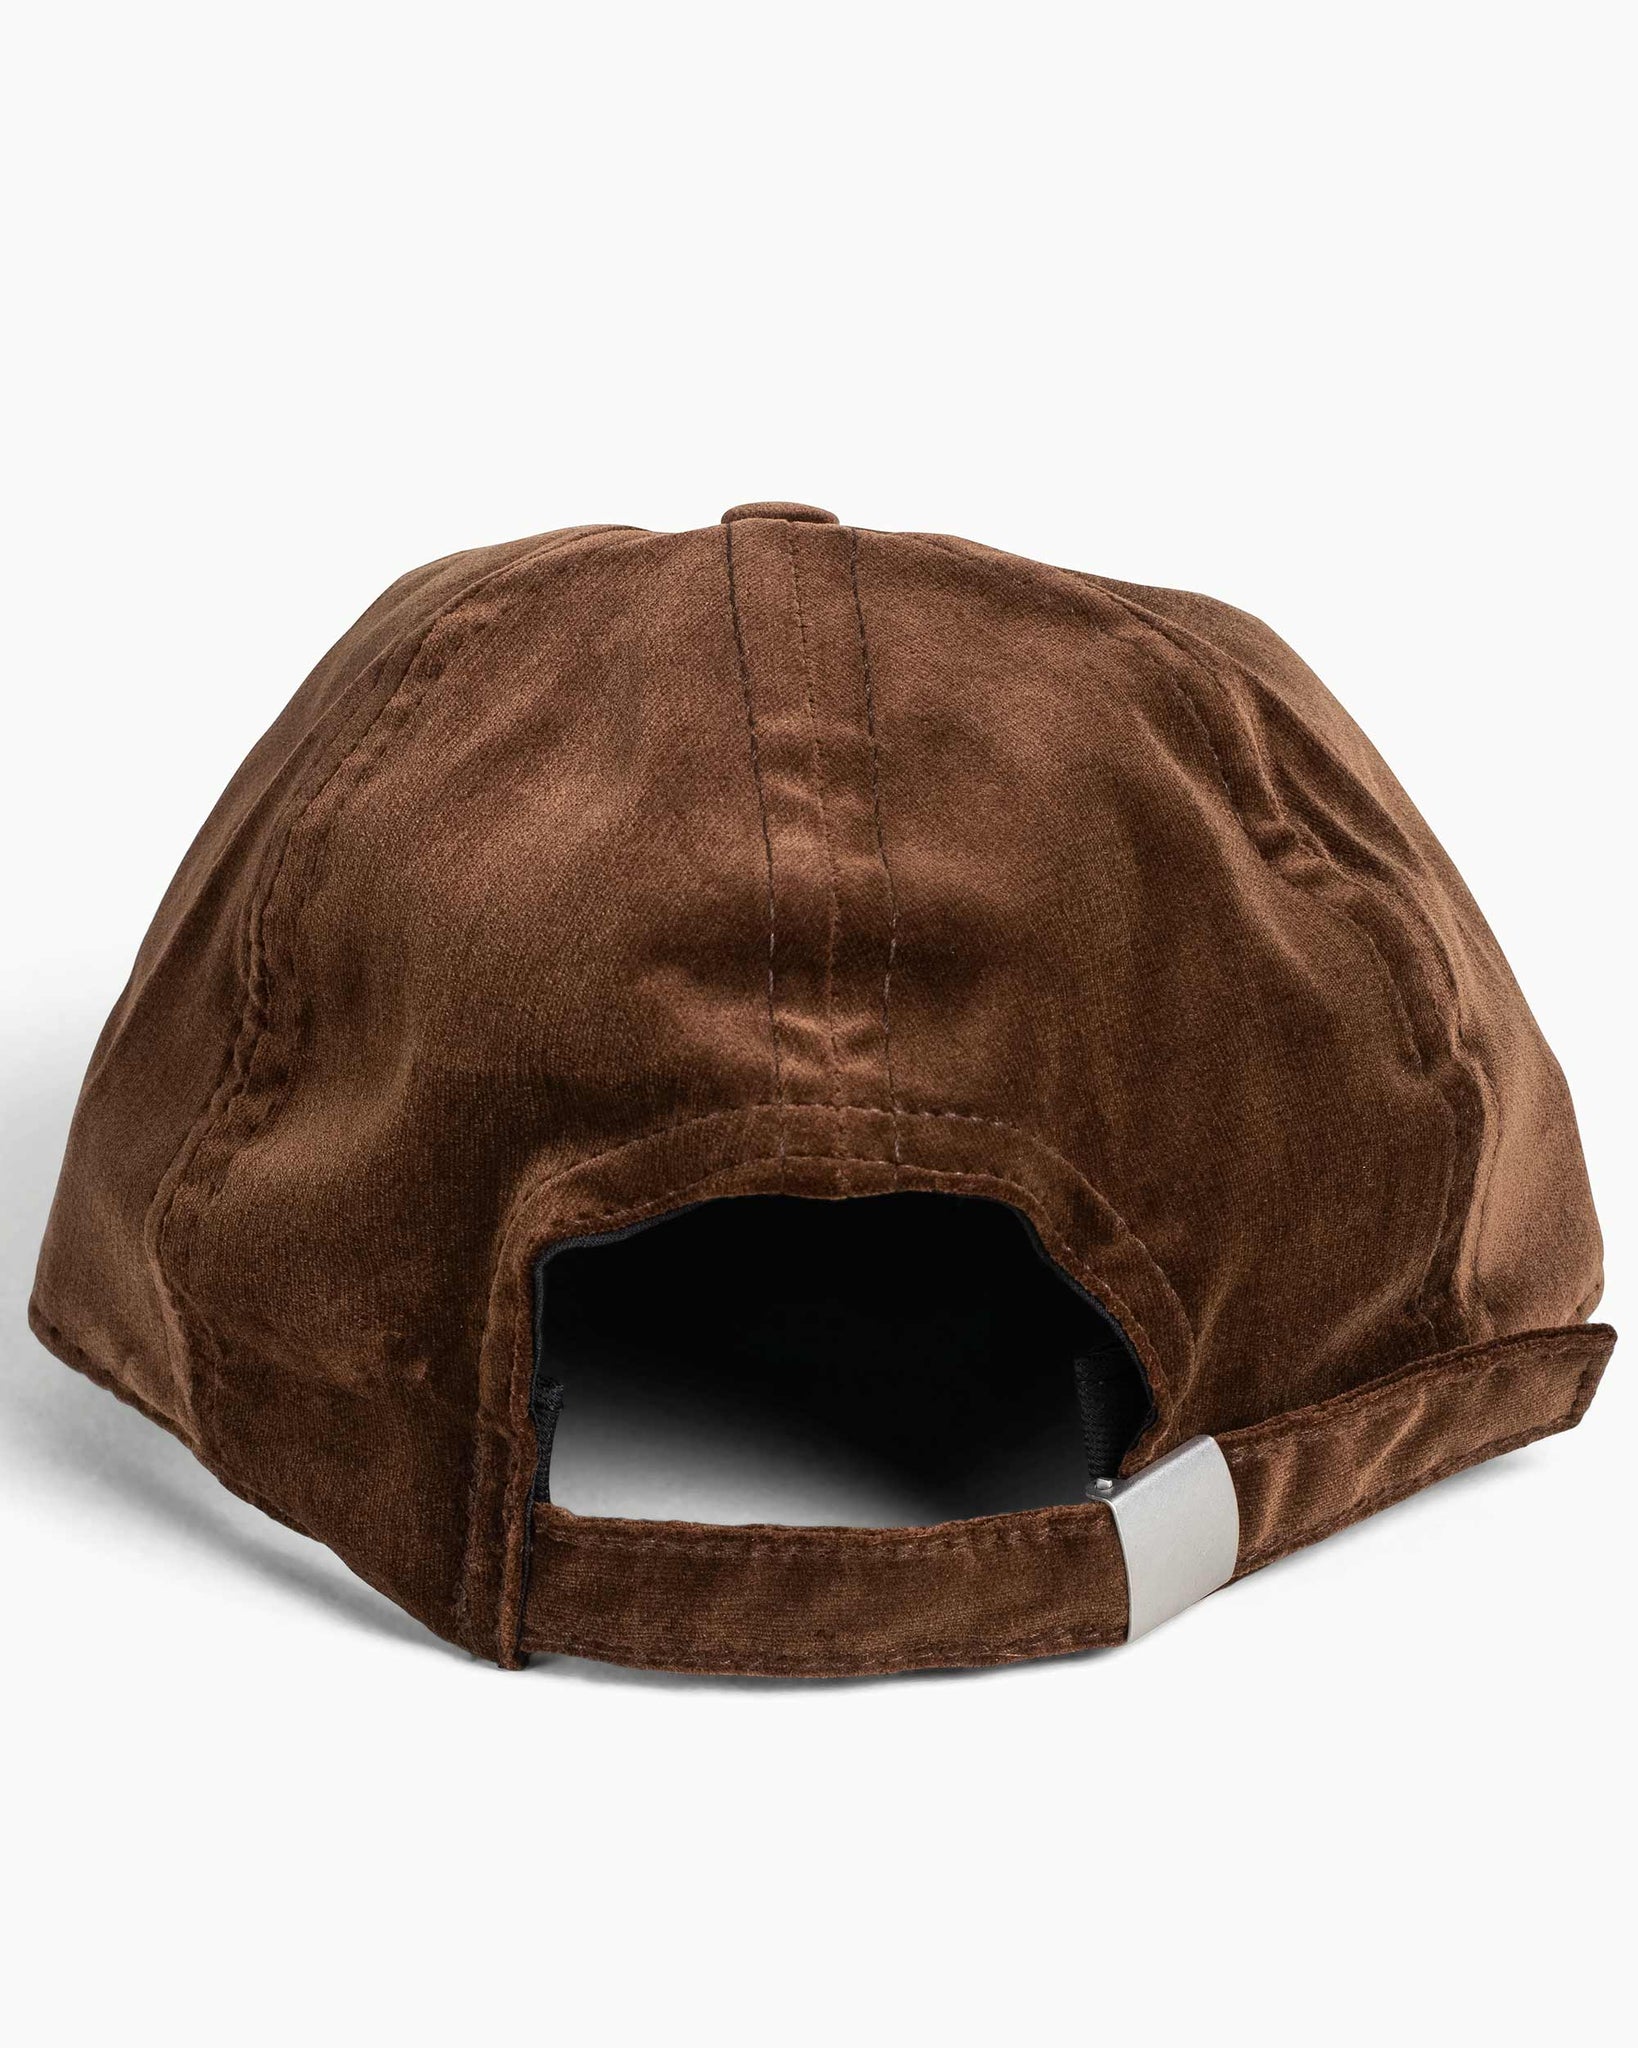 Carhartt Men's Dusty Olive Cotton Baseball Cap in the Hats department at